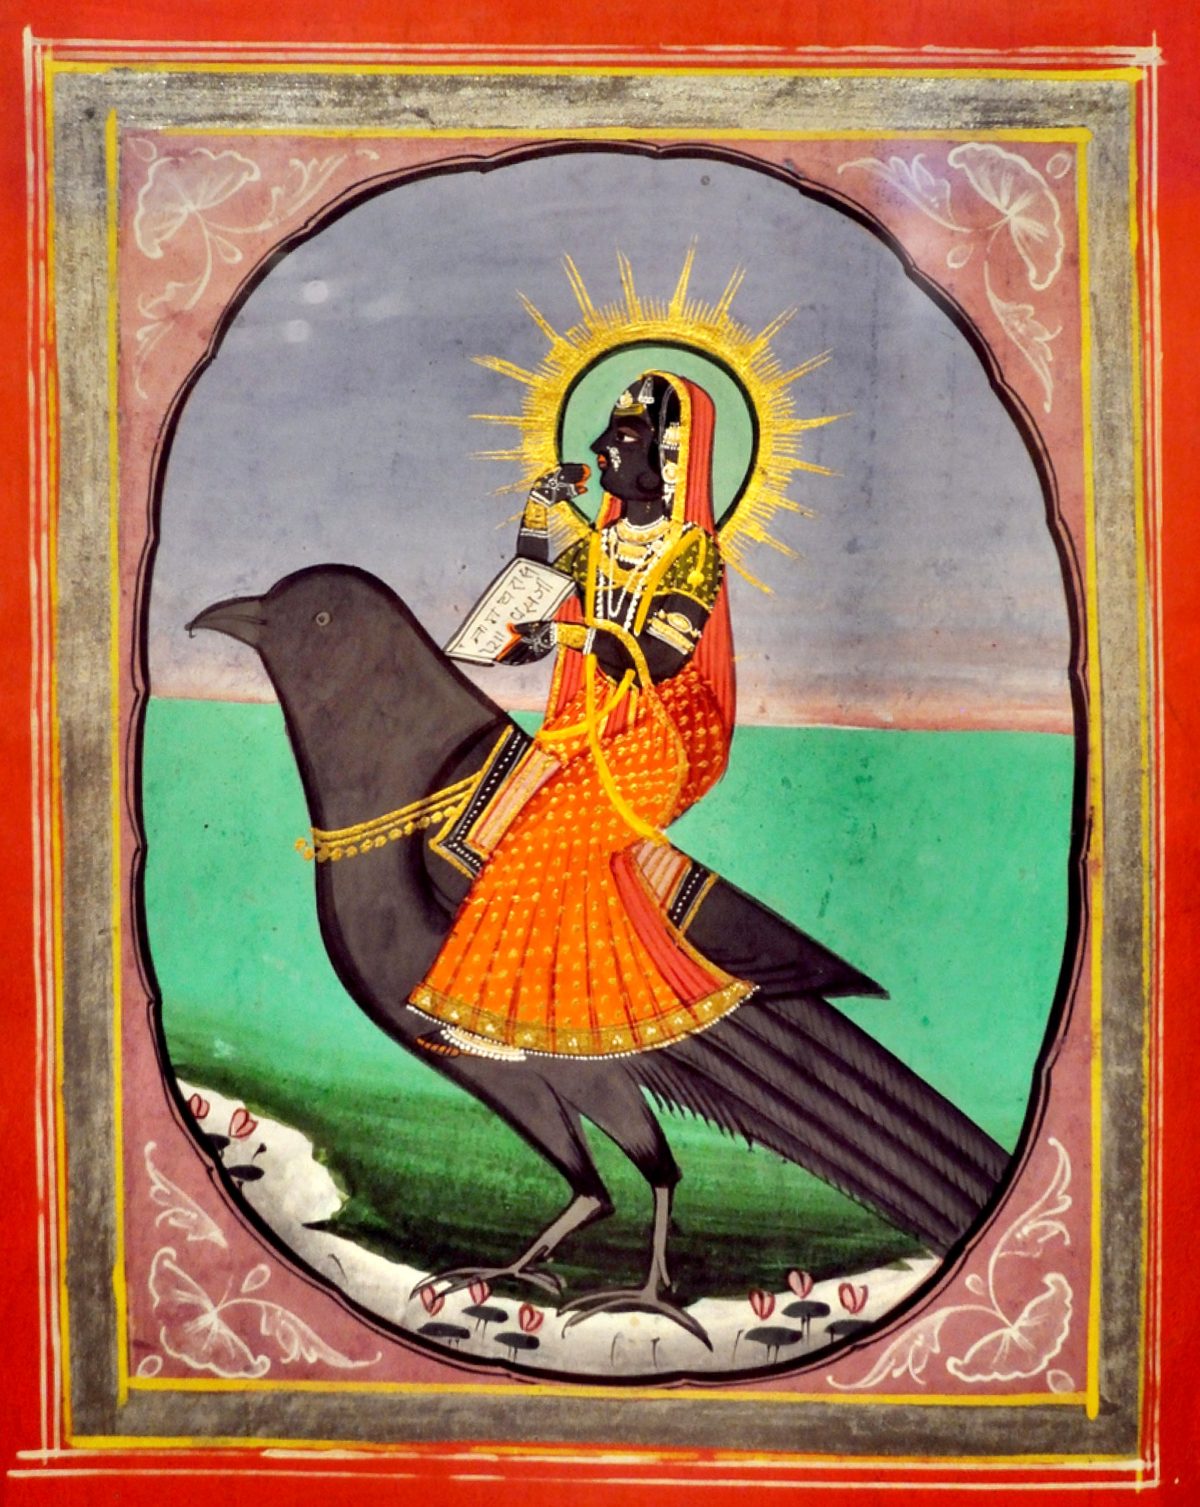 A painting of the goddess Dhumavati riding a crow.